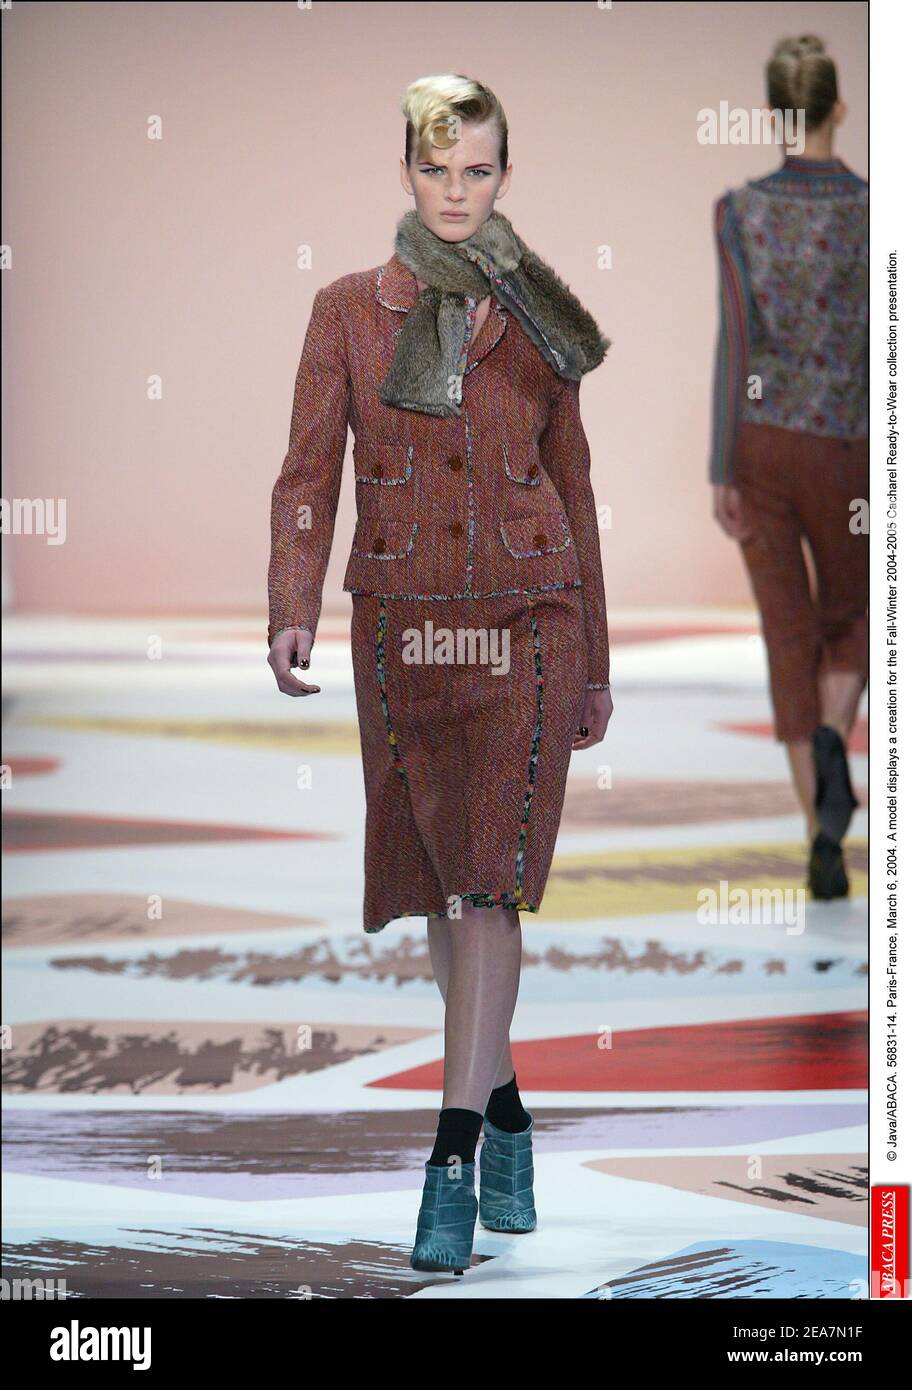 Louis Vuitton Fall-Winter 2004-2005 ready-to-wear Fashion Show in News  Photo - Getty Images